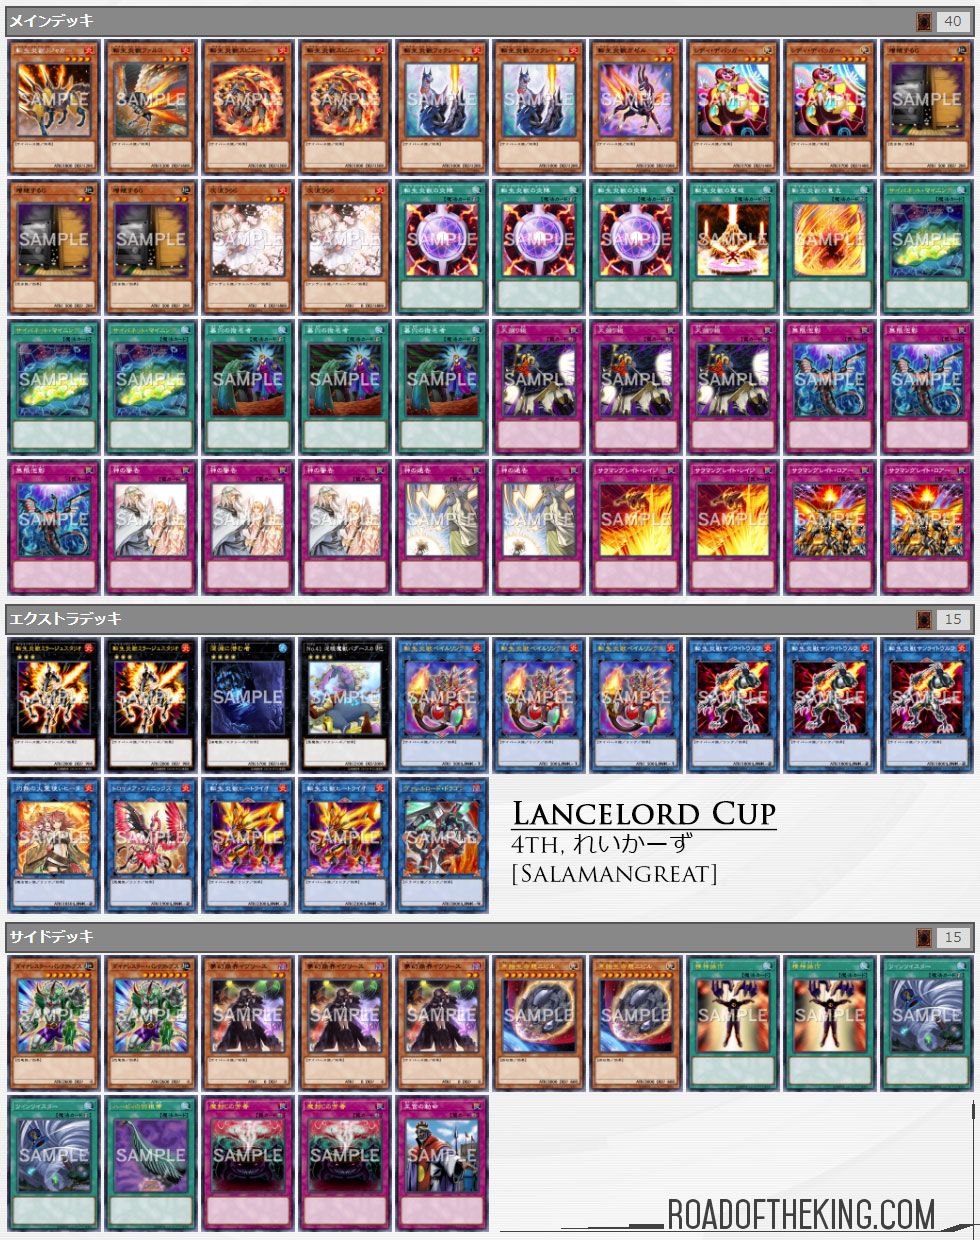 TCG POTE Metagame Tournament Report: 1 - YGOPRODeck